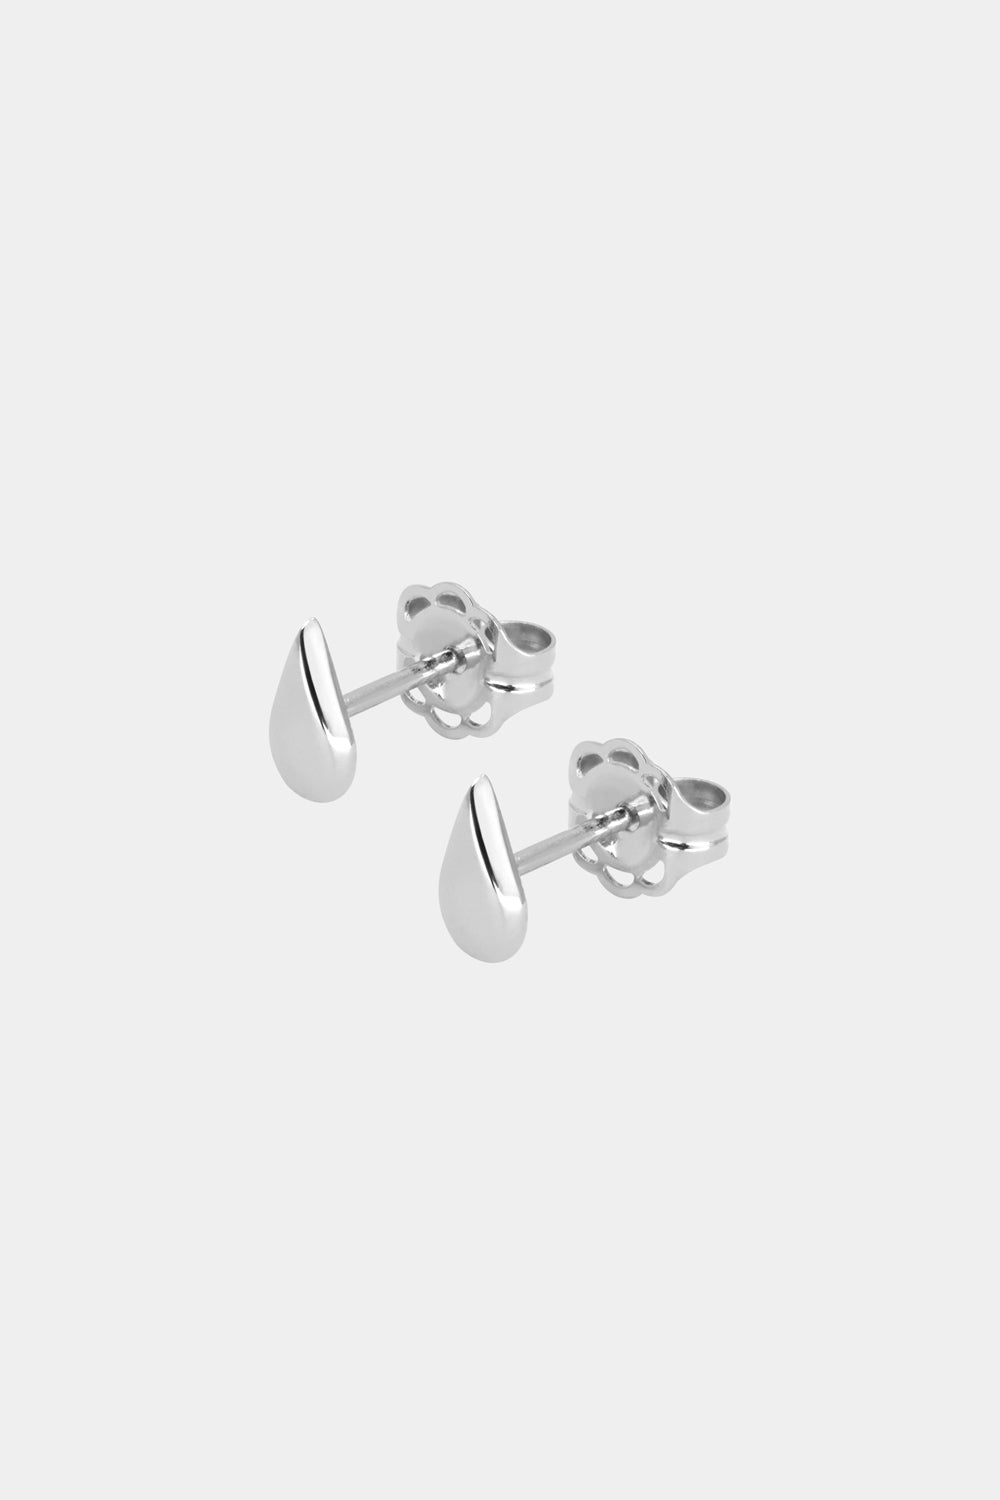 Pear Stud Earrings | Silver or 9K White Gold, More Options Available| Natasha Schweitzer